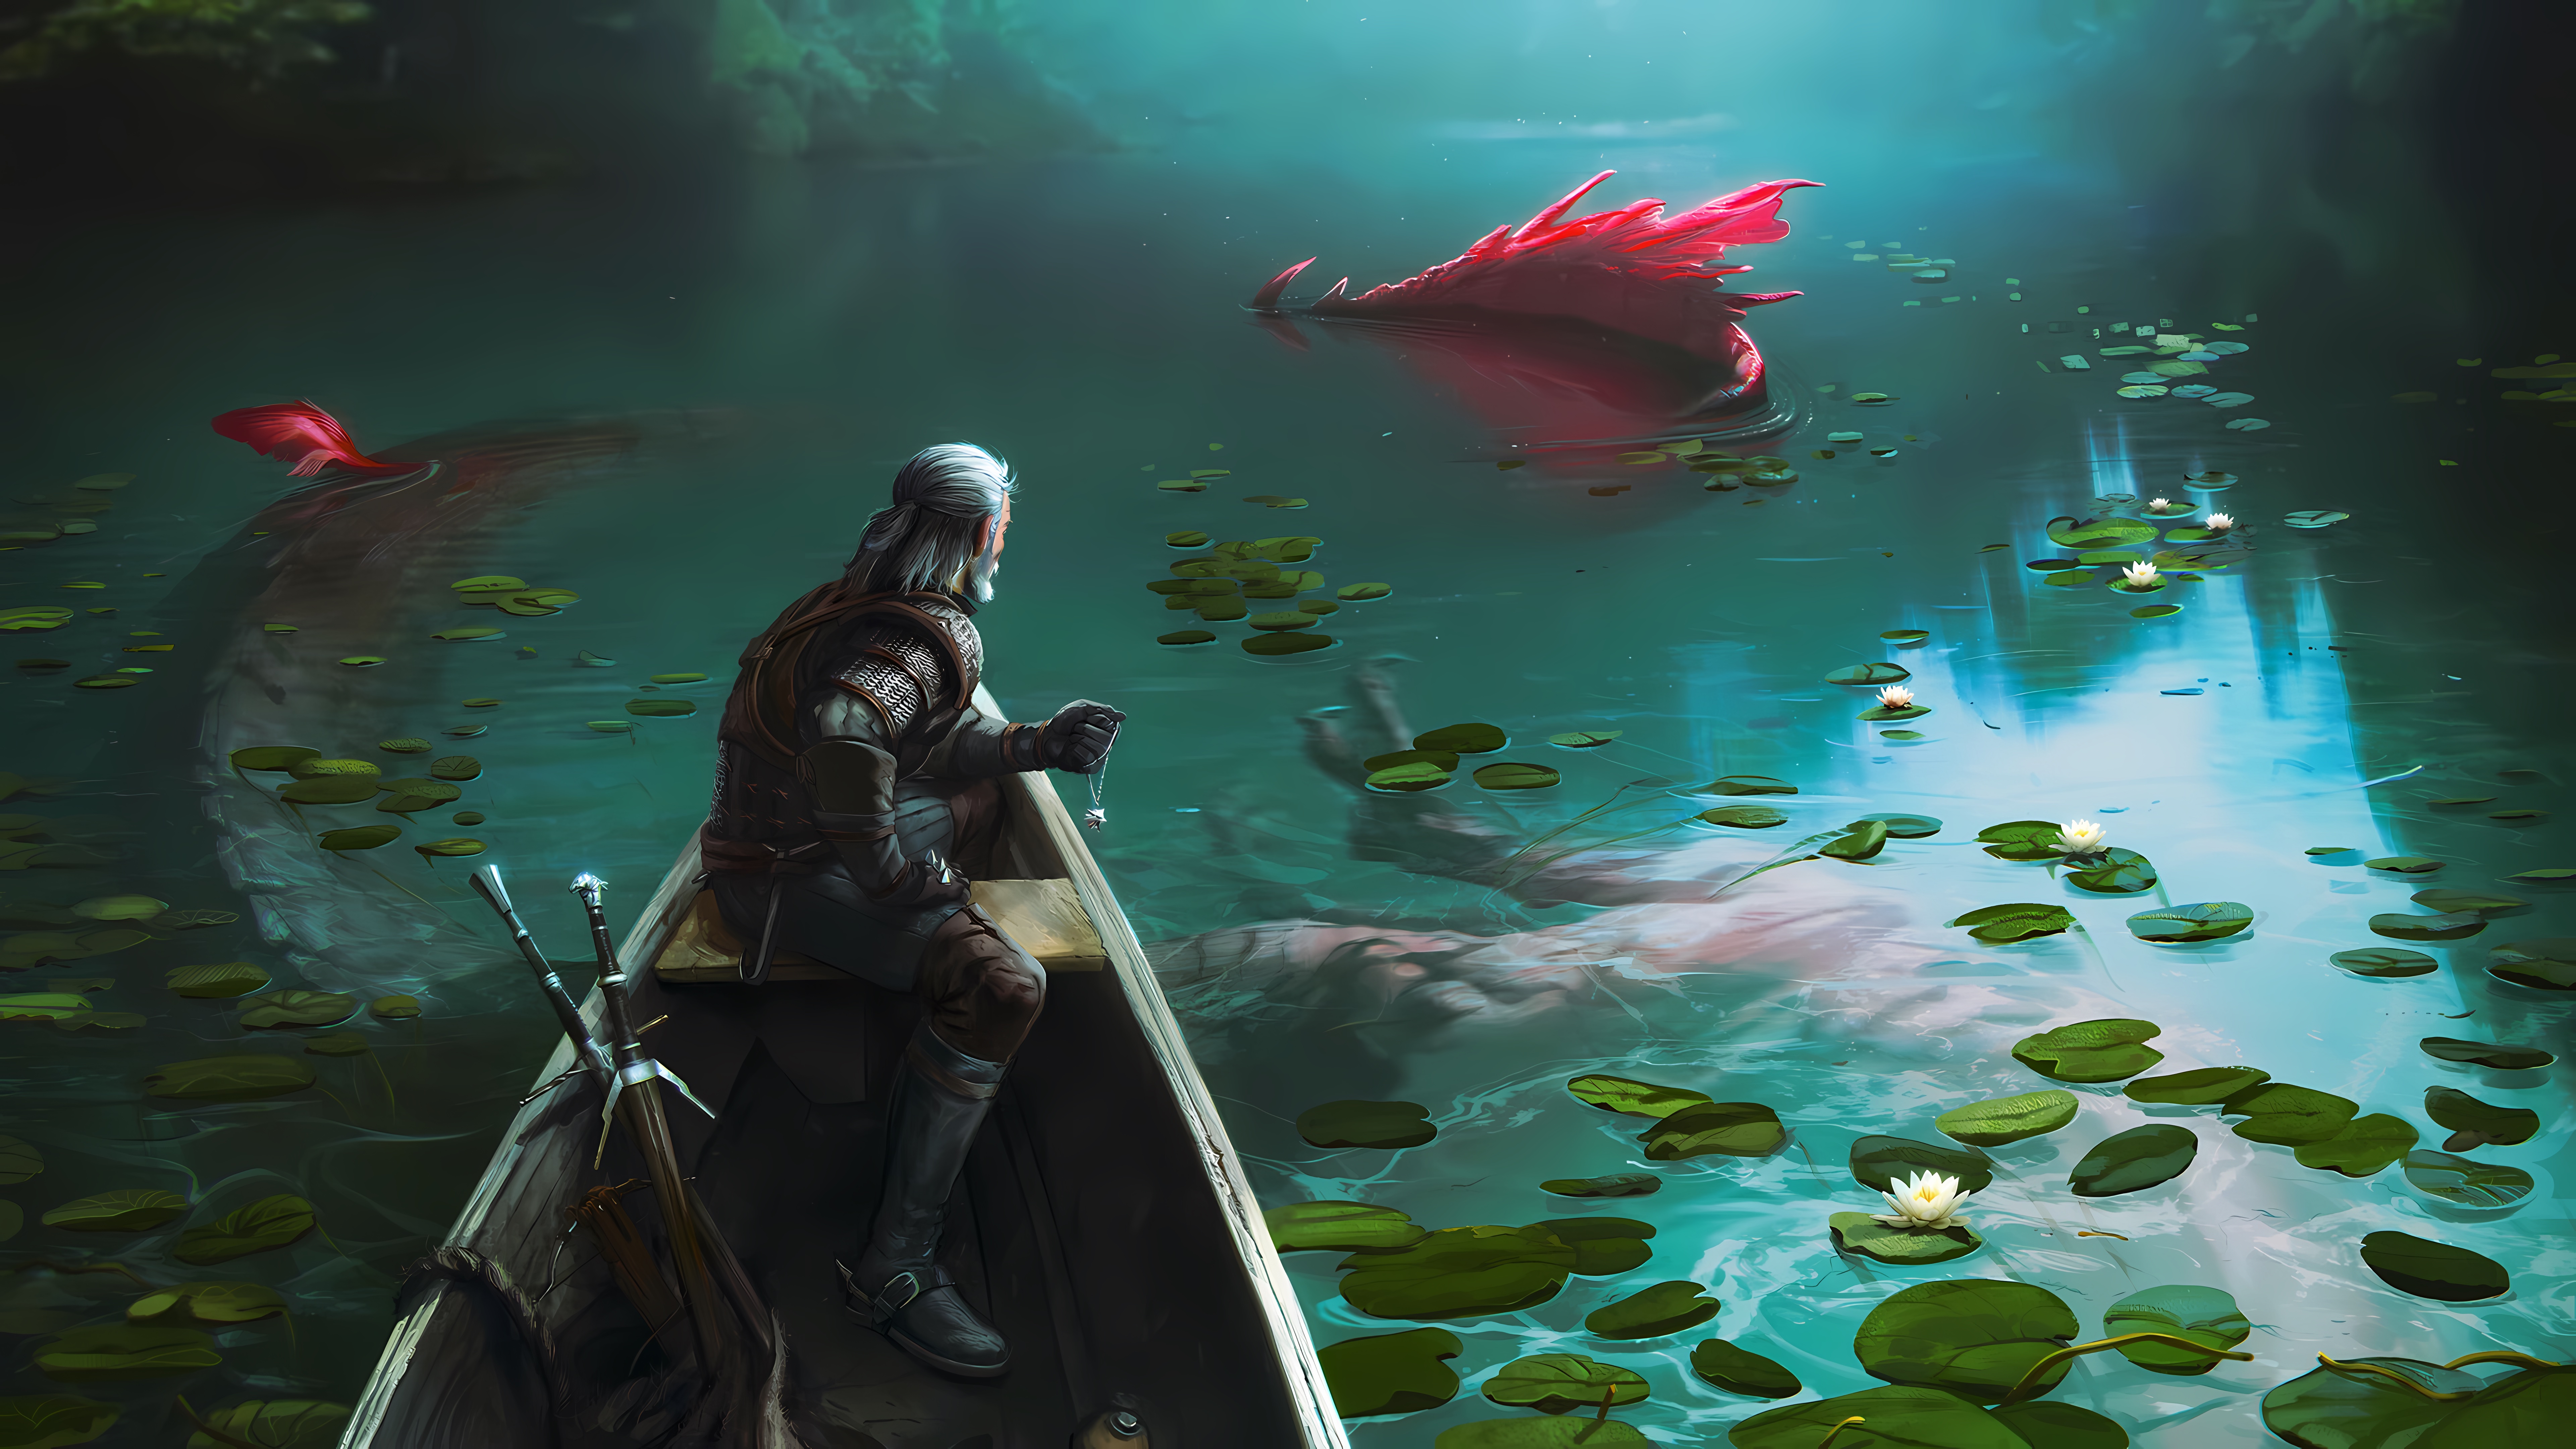 ArtStation The Witcher Geralt Of Rivia Video Games PC Gaming Video Game Art Fantasy Art Video Game M 7680x4320